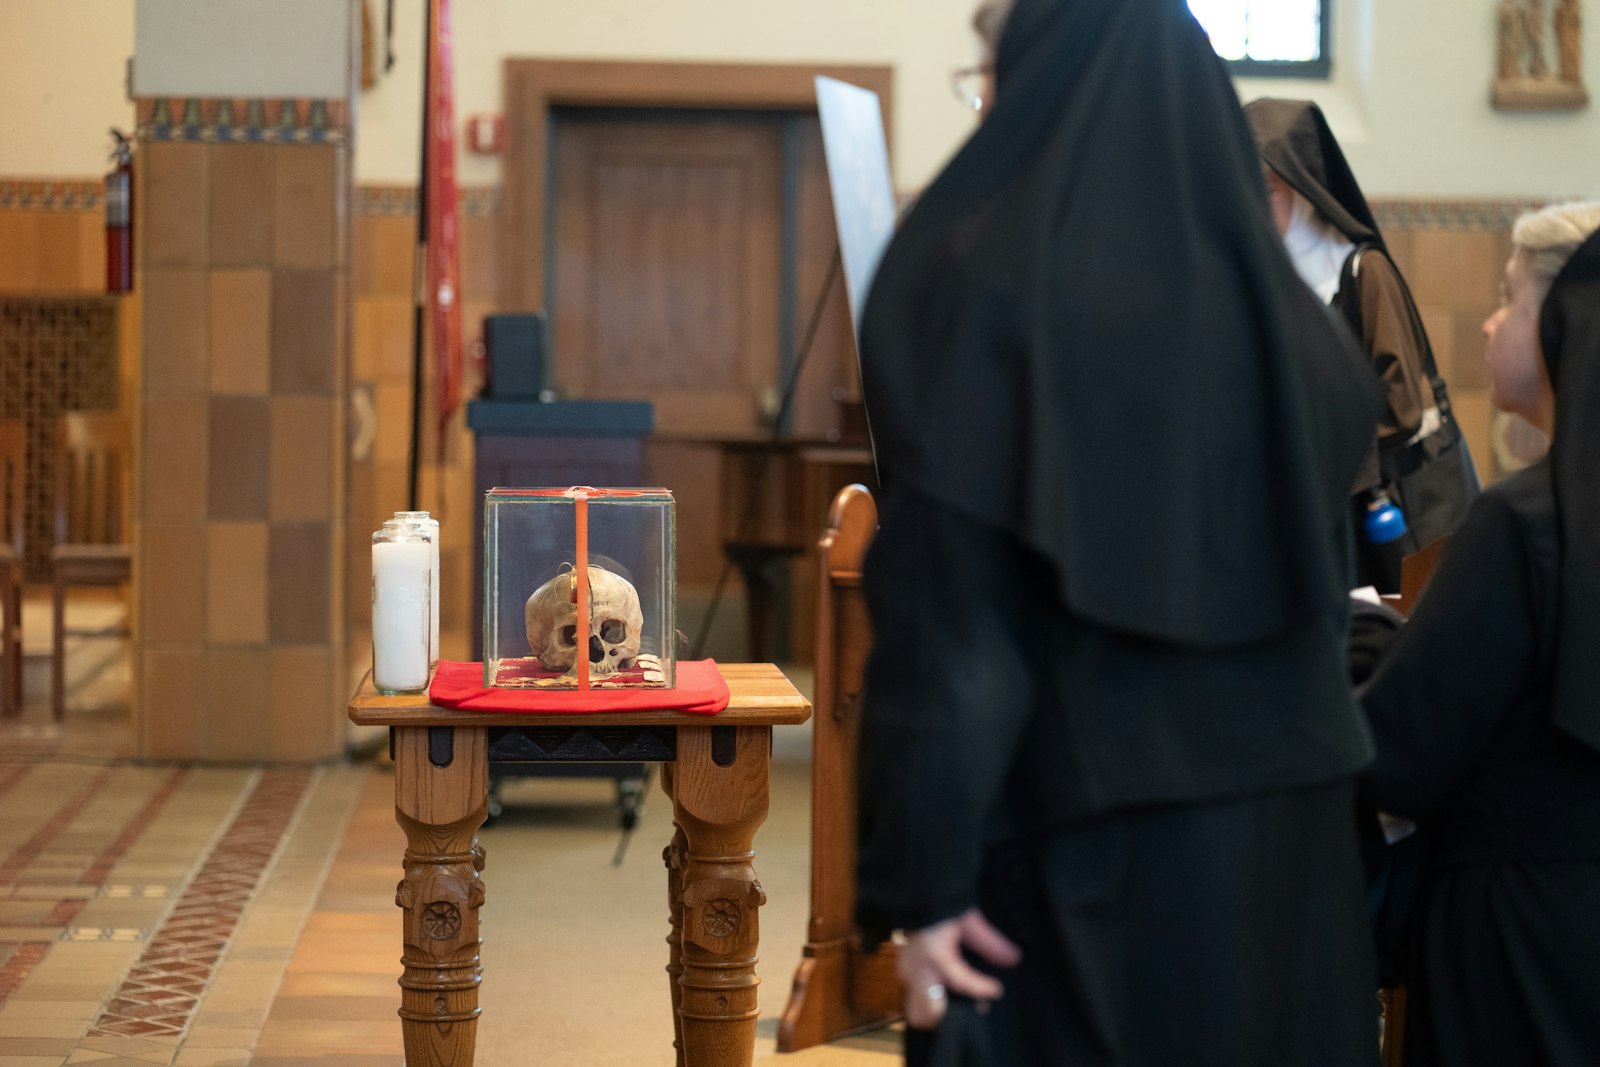 St. Jean de Brebeuf's skull has been on a nation-wide tour organized by the Society of Jesus to promote vocations. The tour will conclude at St. Patrick's Cathedral in New York City on March 6.